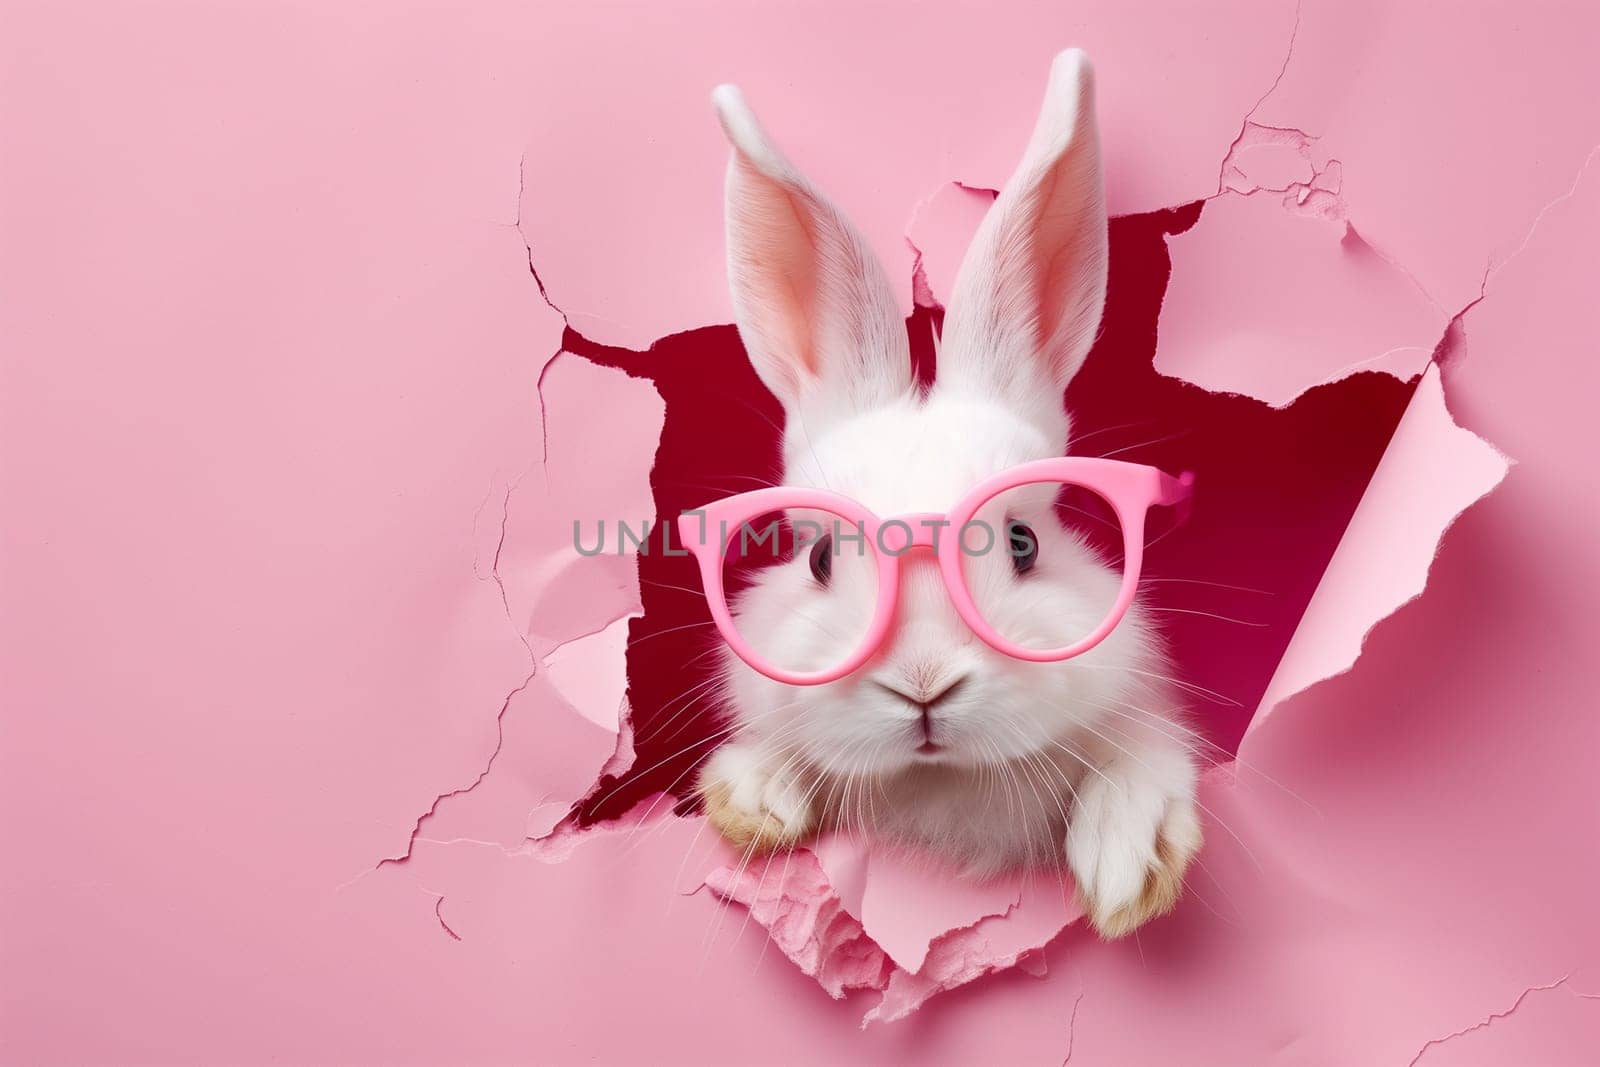 White Rabbit With Pink Glasses Peeking Through Hole in Pink Wall by Sd28DimoN_1976